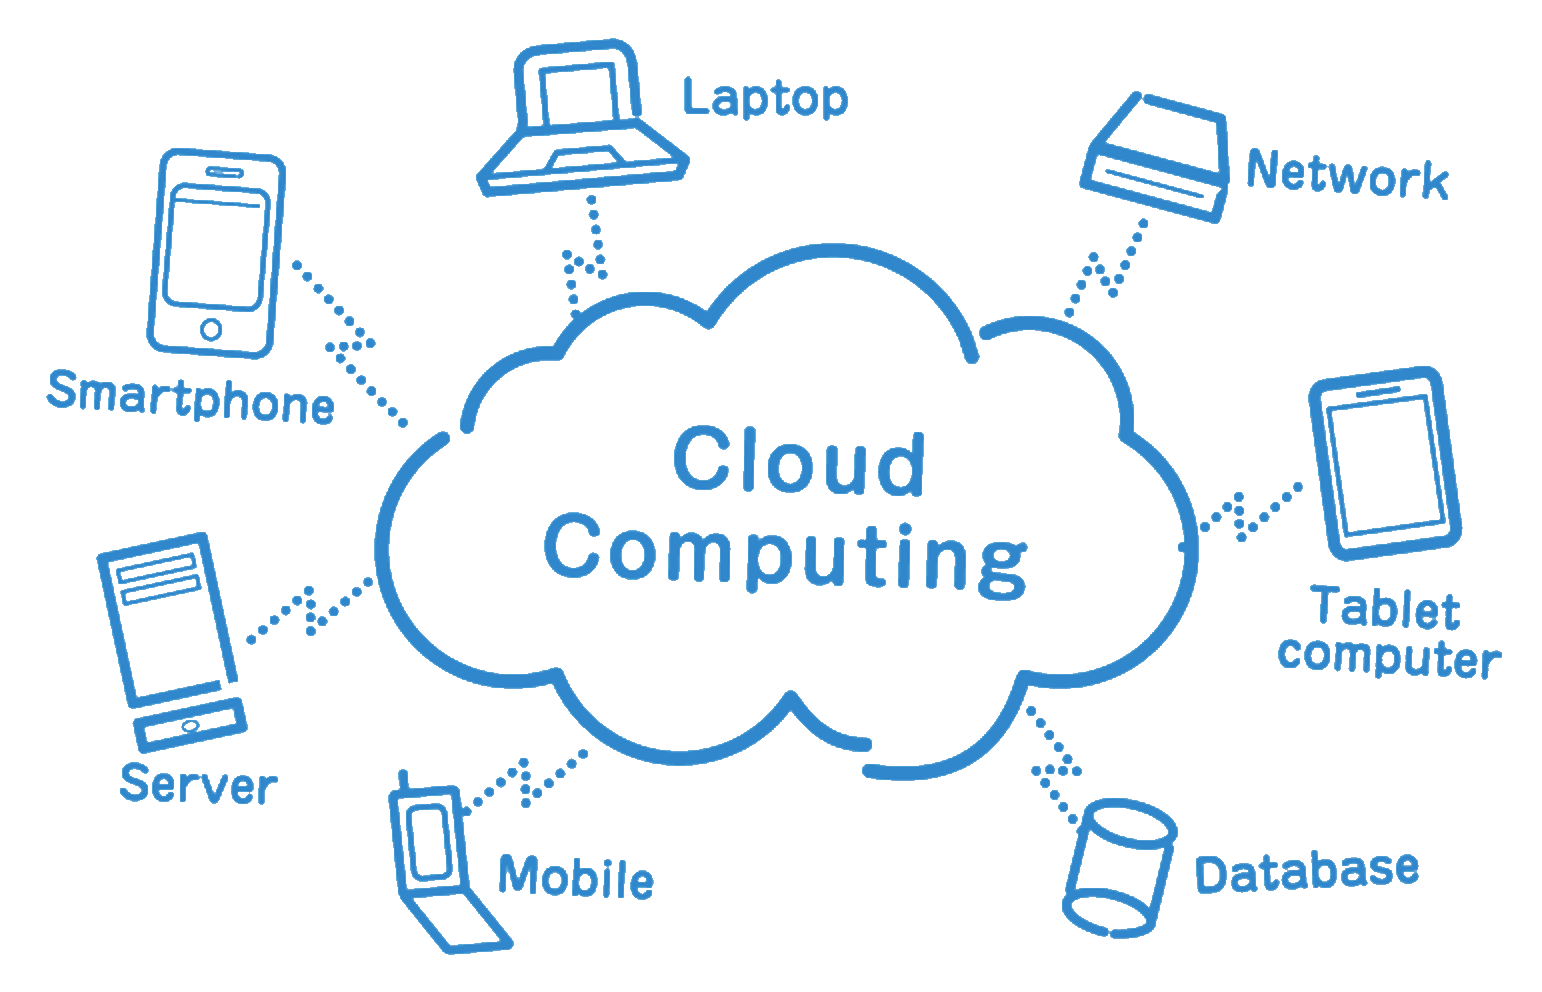 How can small businesses in Africa benefit from cloud computing?